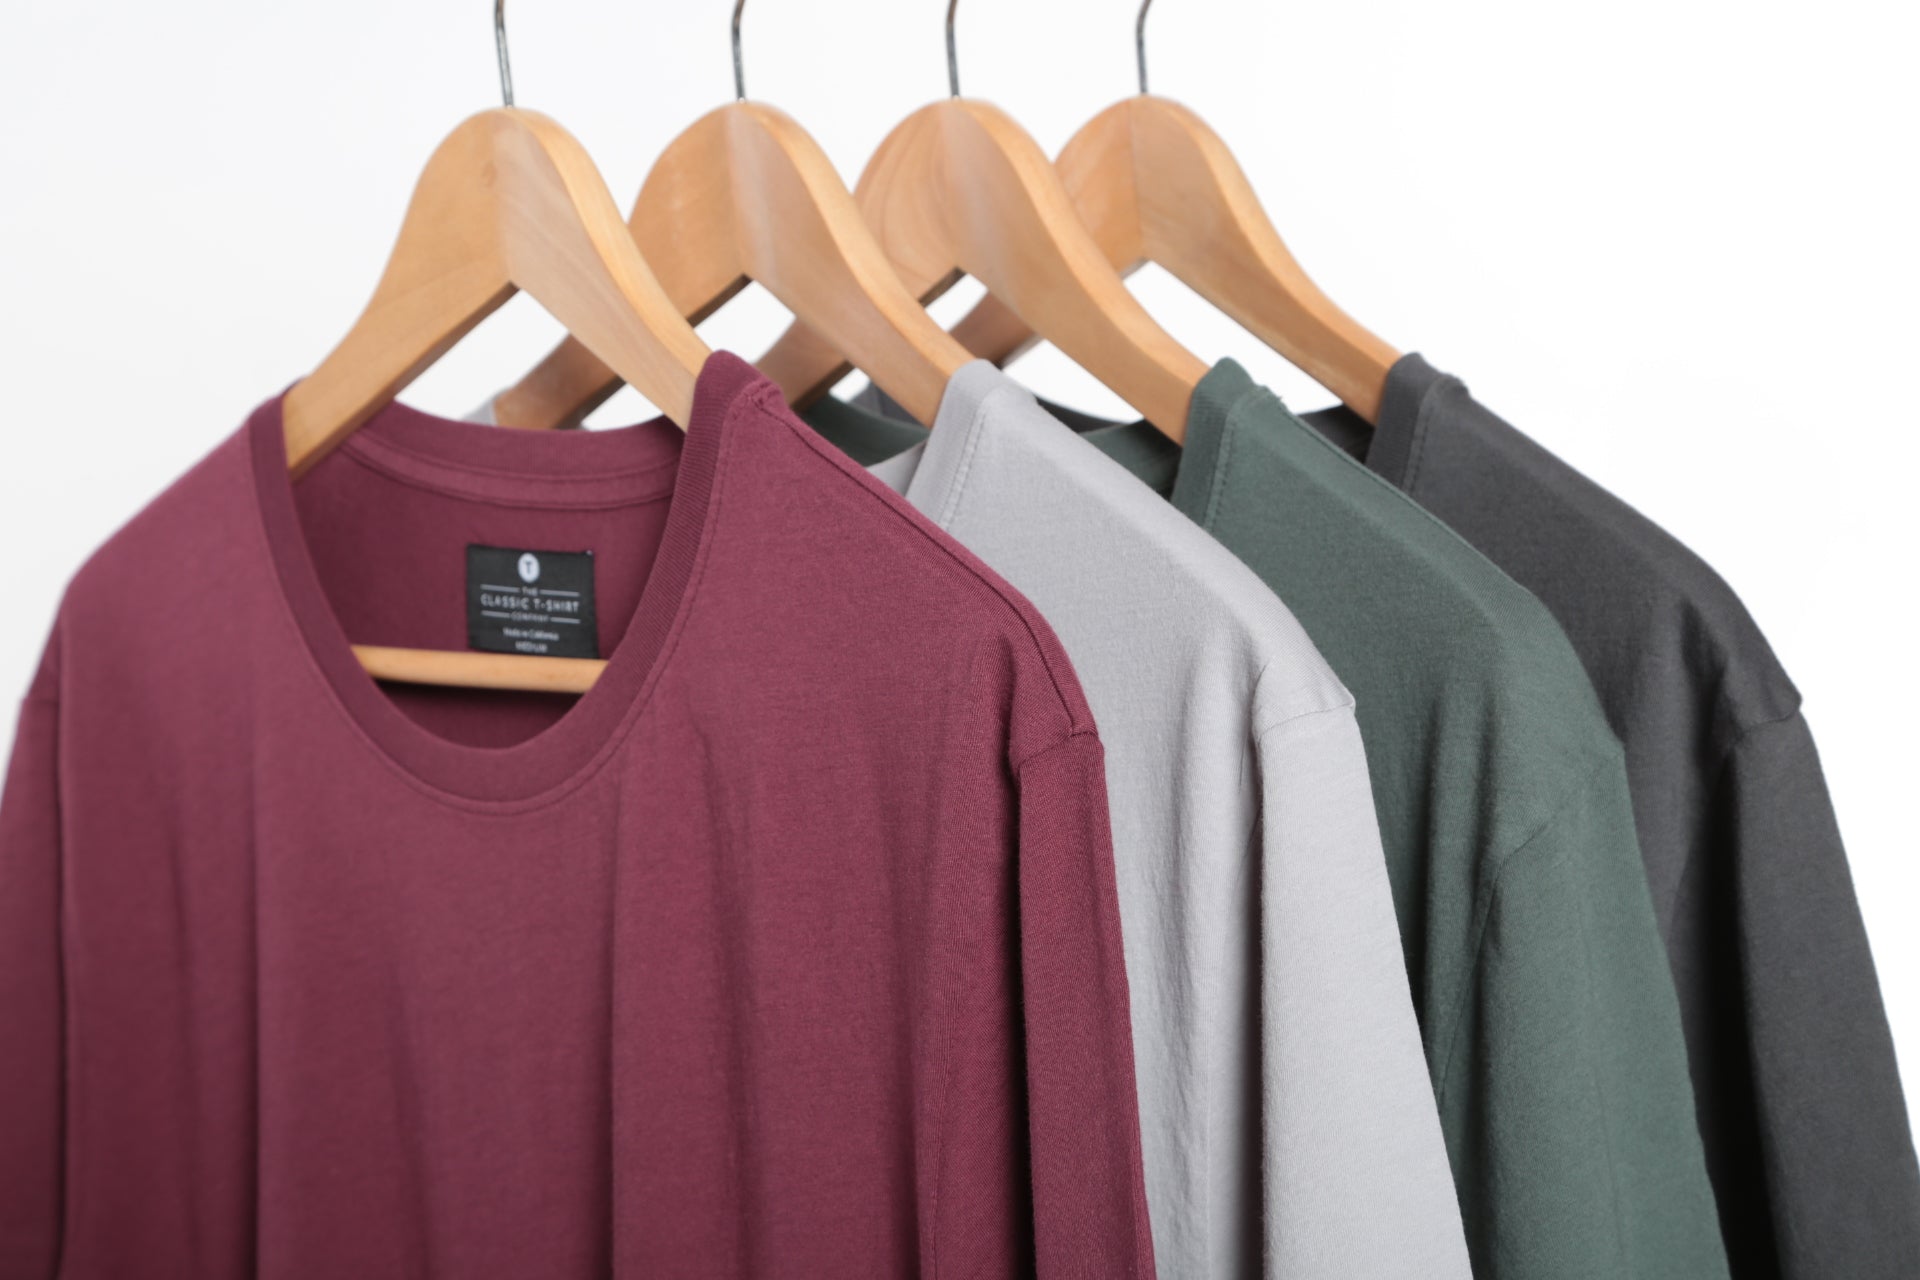 How to Take Care of Your Organic Cotton T-shirts